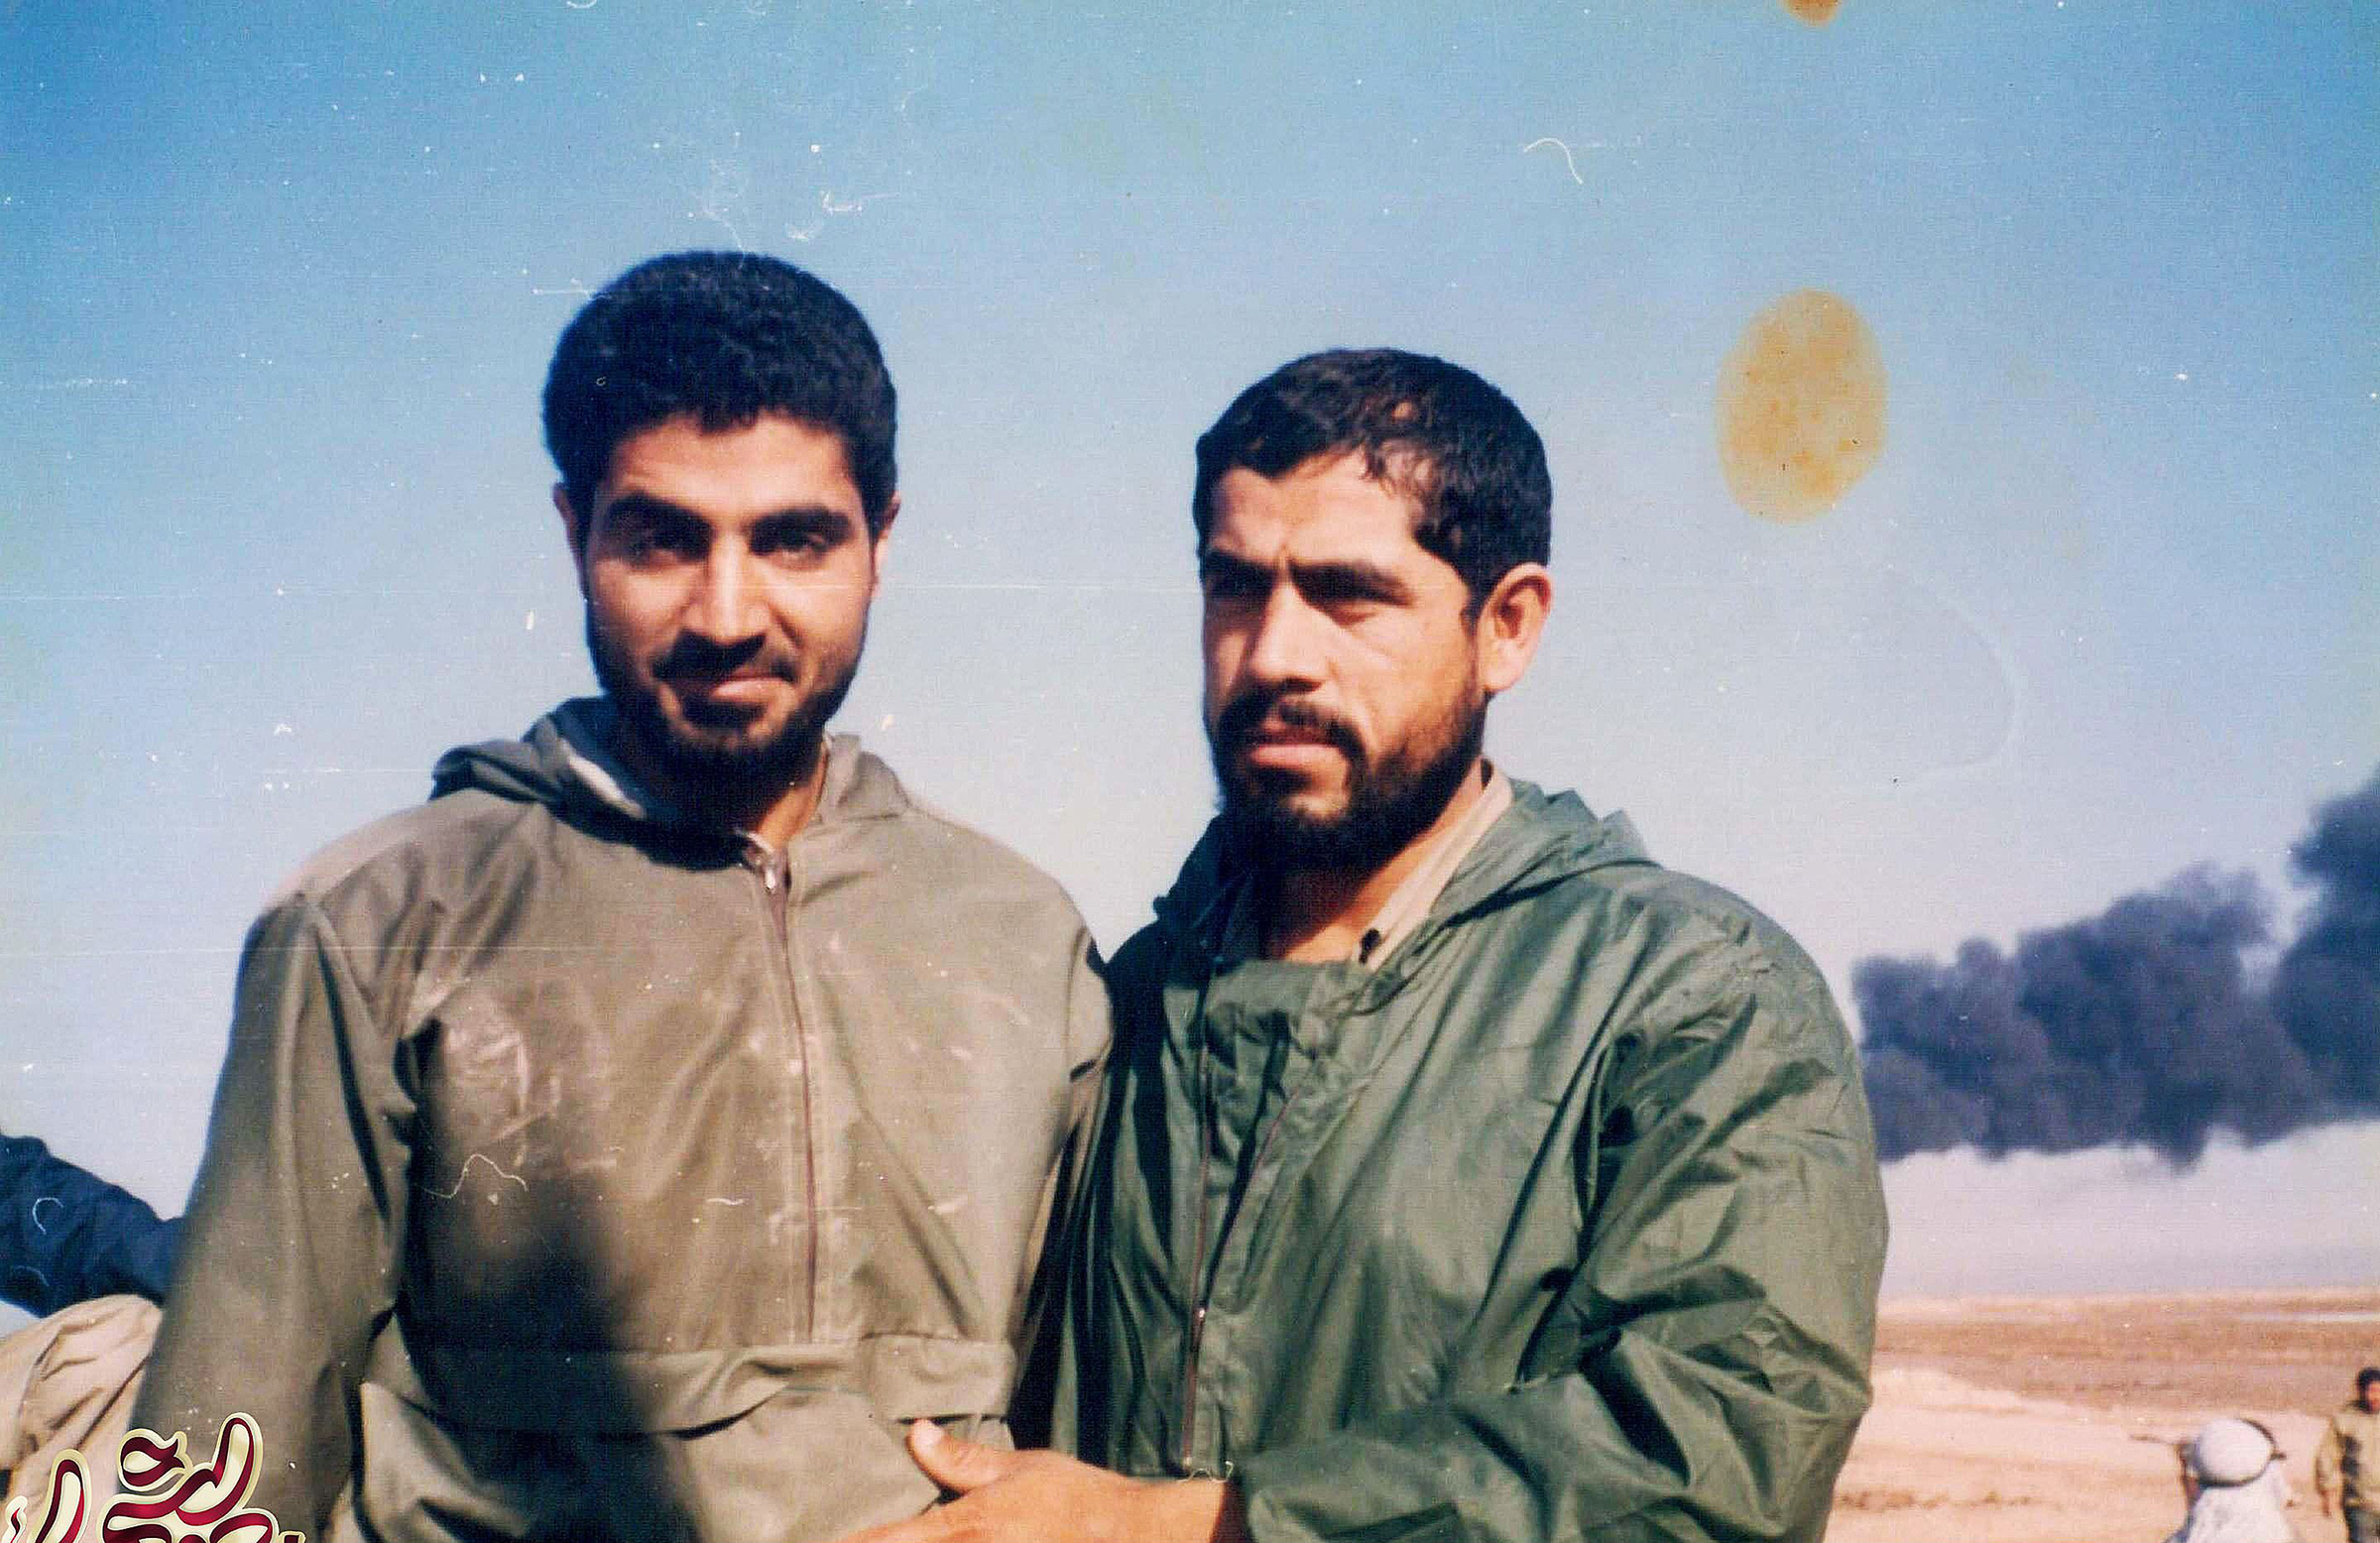 Qasem Soleimani during the Iran-Iraq war in the early 1980s.